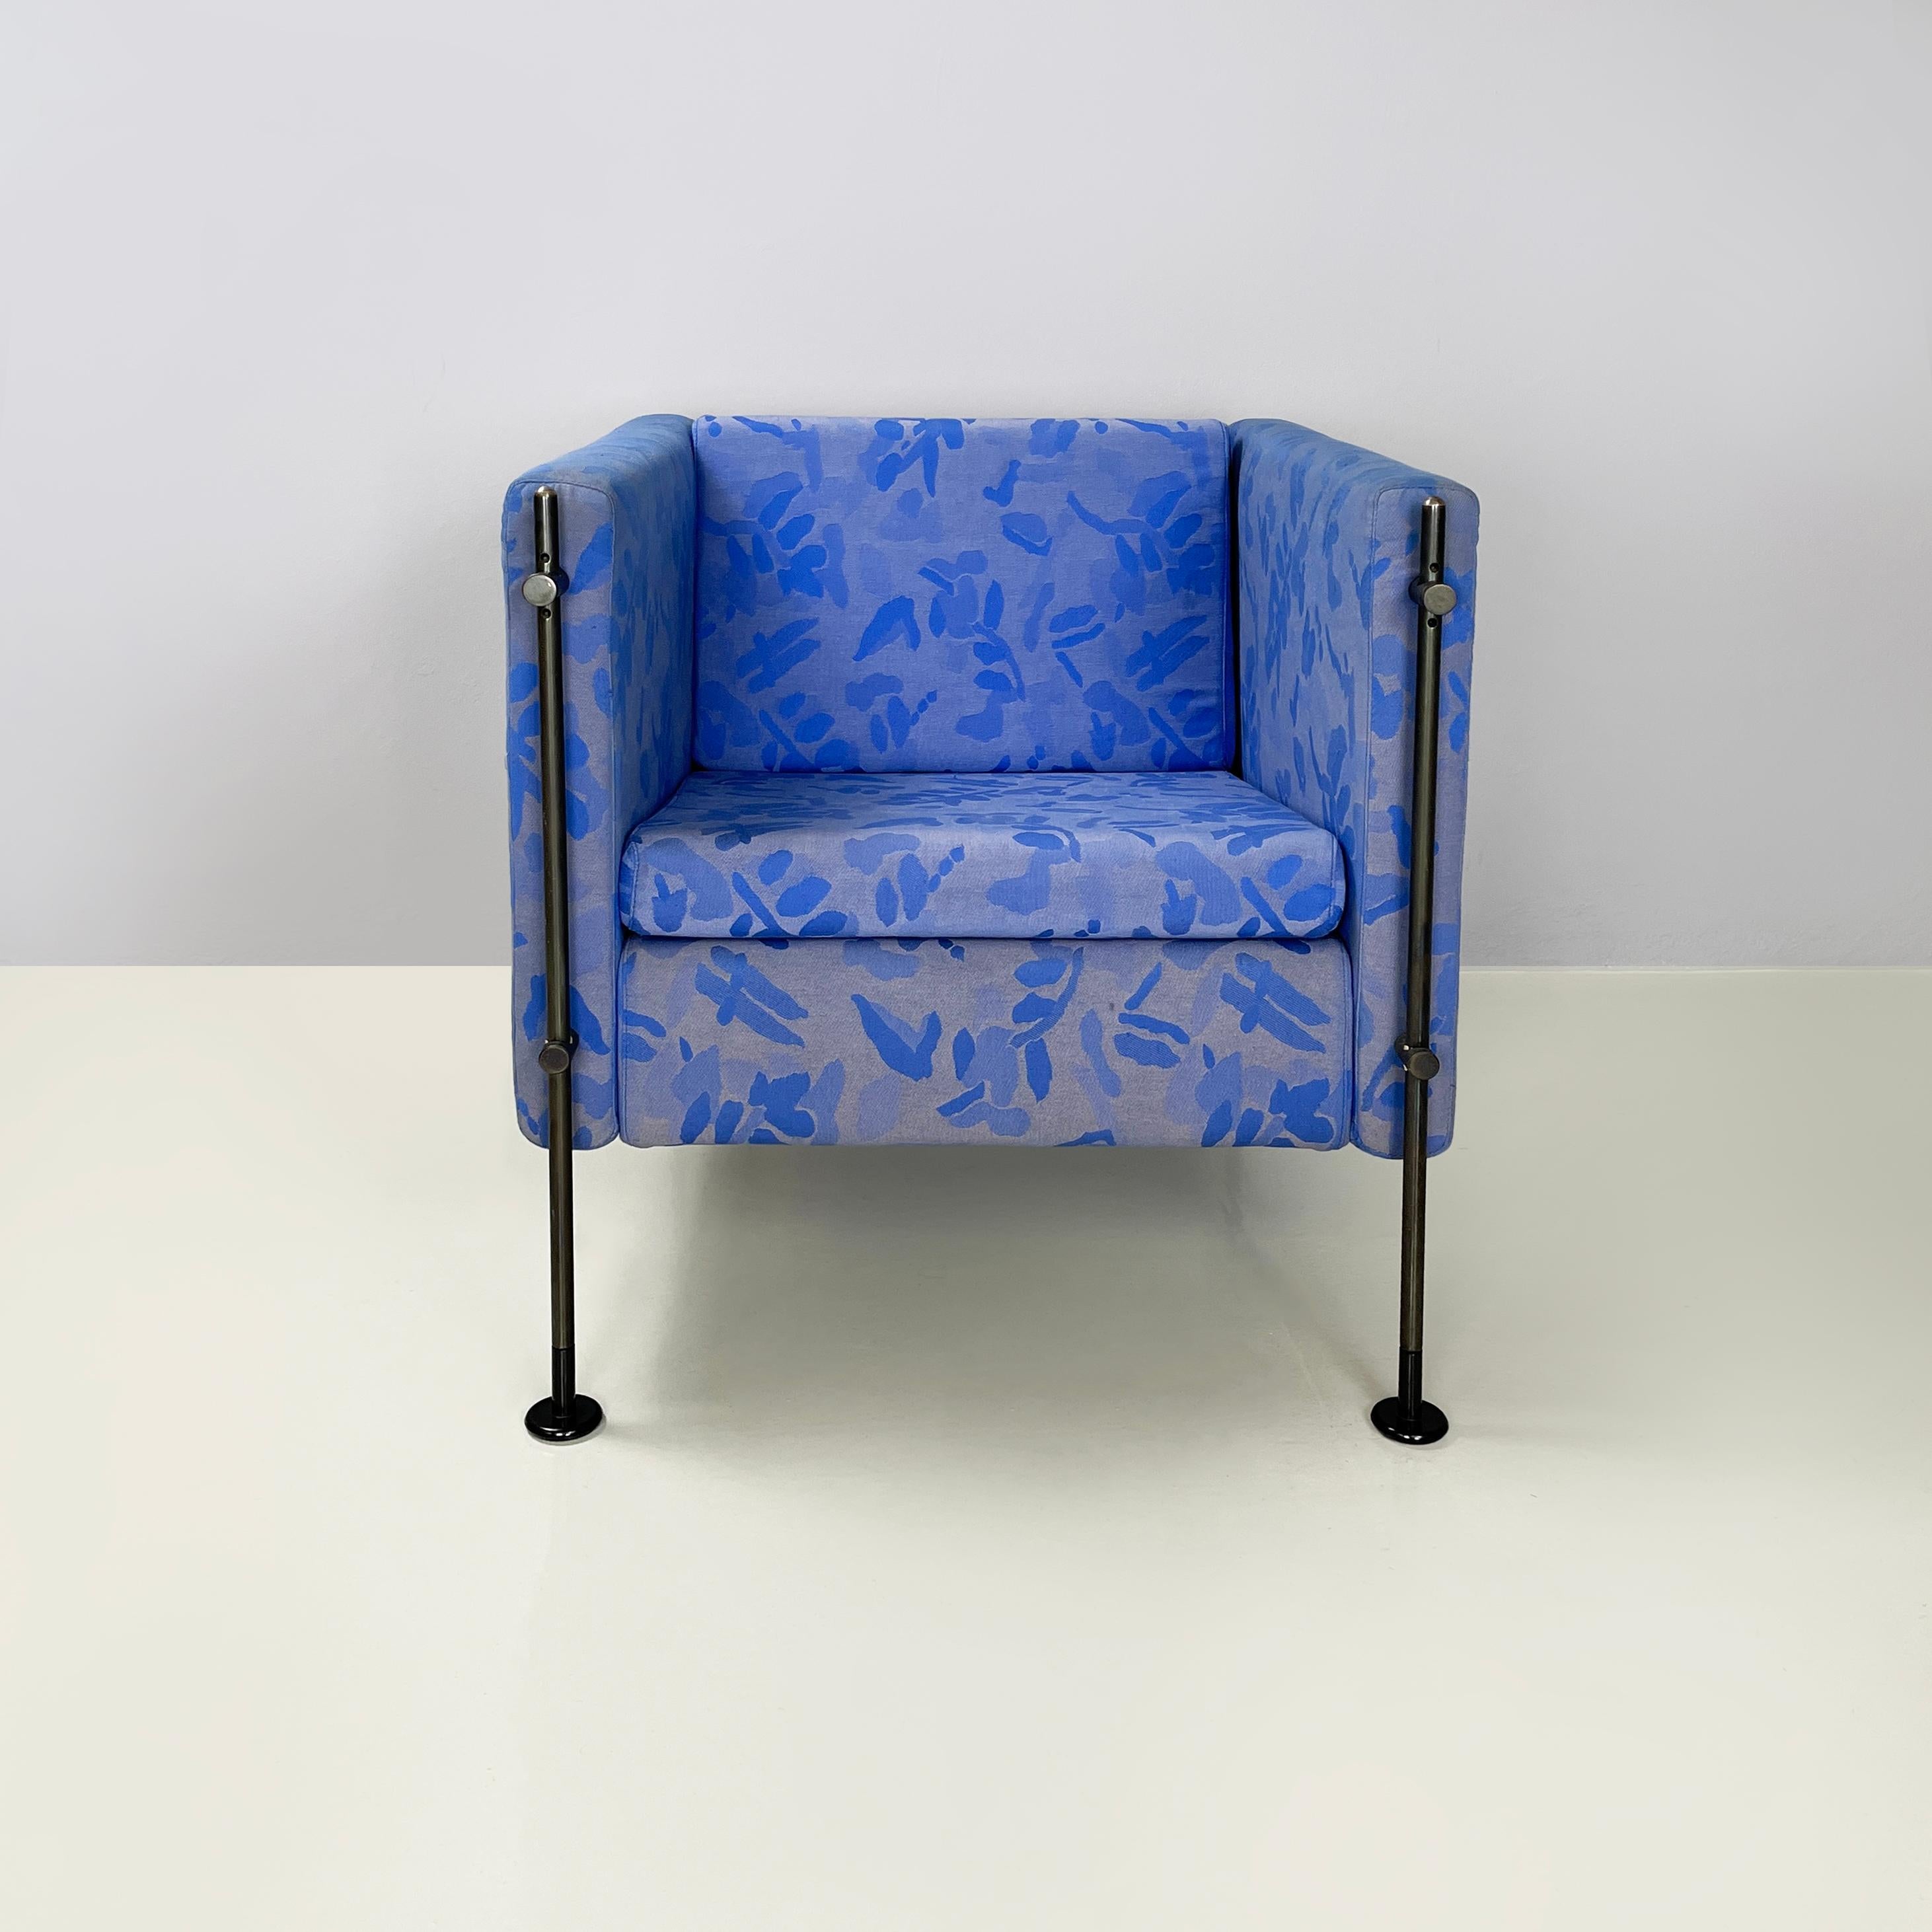 Italian modern Blu fabric Armchair Felix by Burkhard Vogtherr for Arflex, 1980s
Armchair mod. Felix with squared seat and backrest, padded and covered in blue fabric with abstract floral design. The square armrests are also padded and covered in the